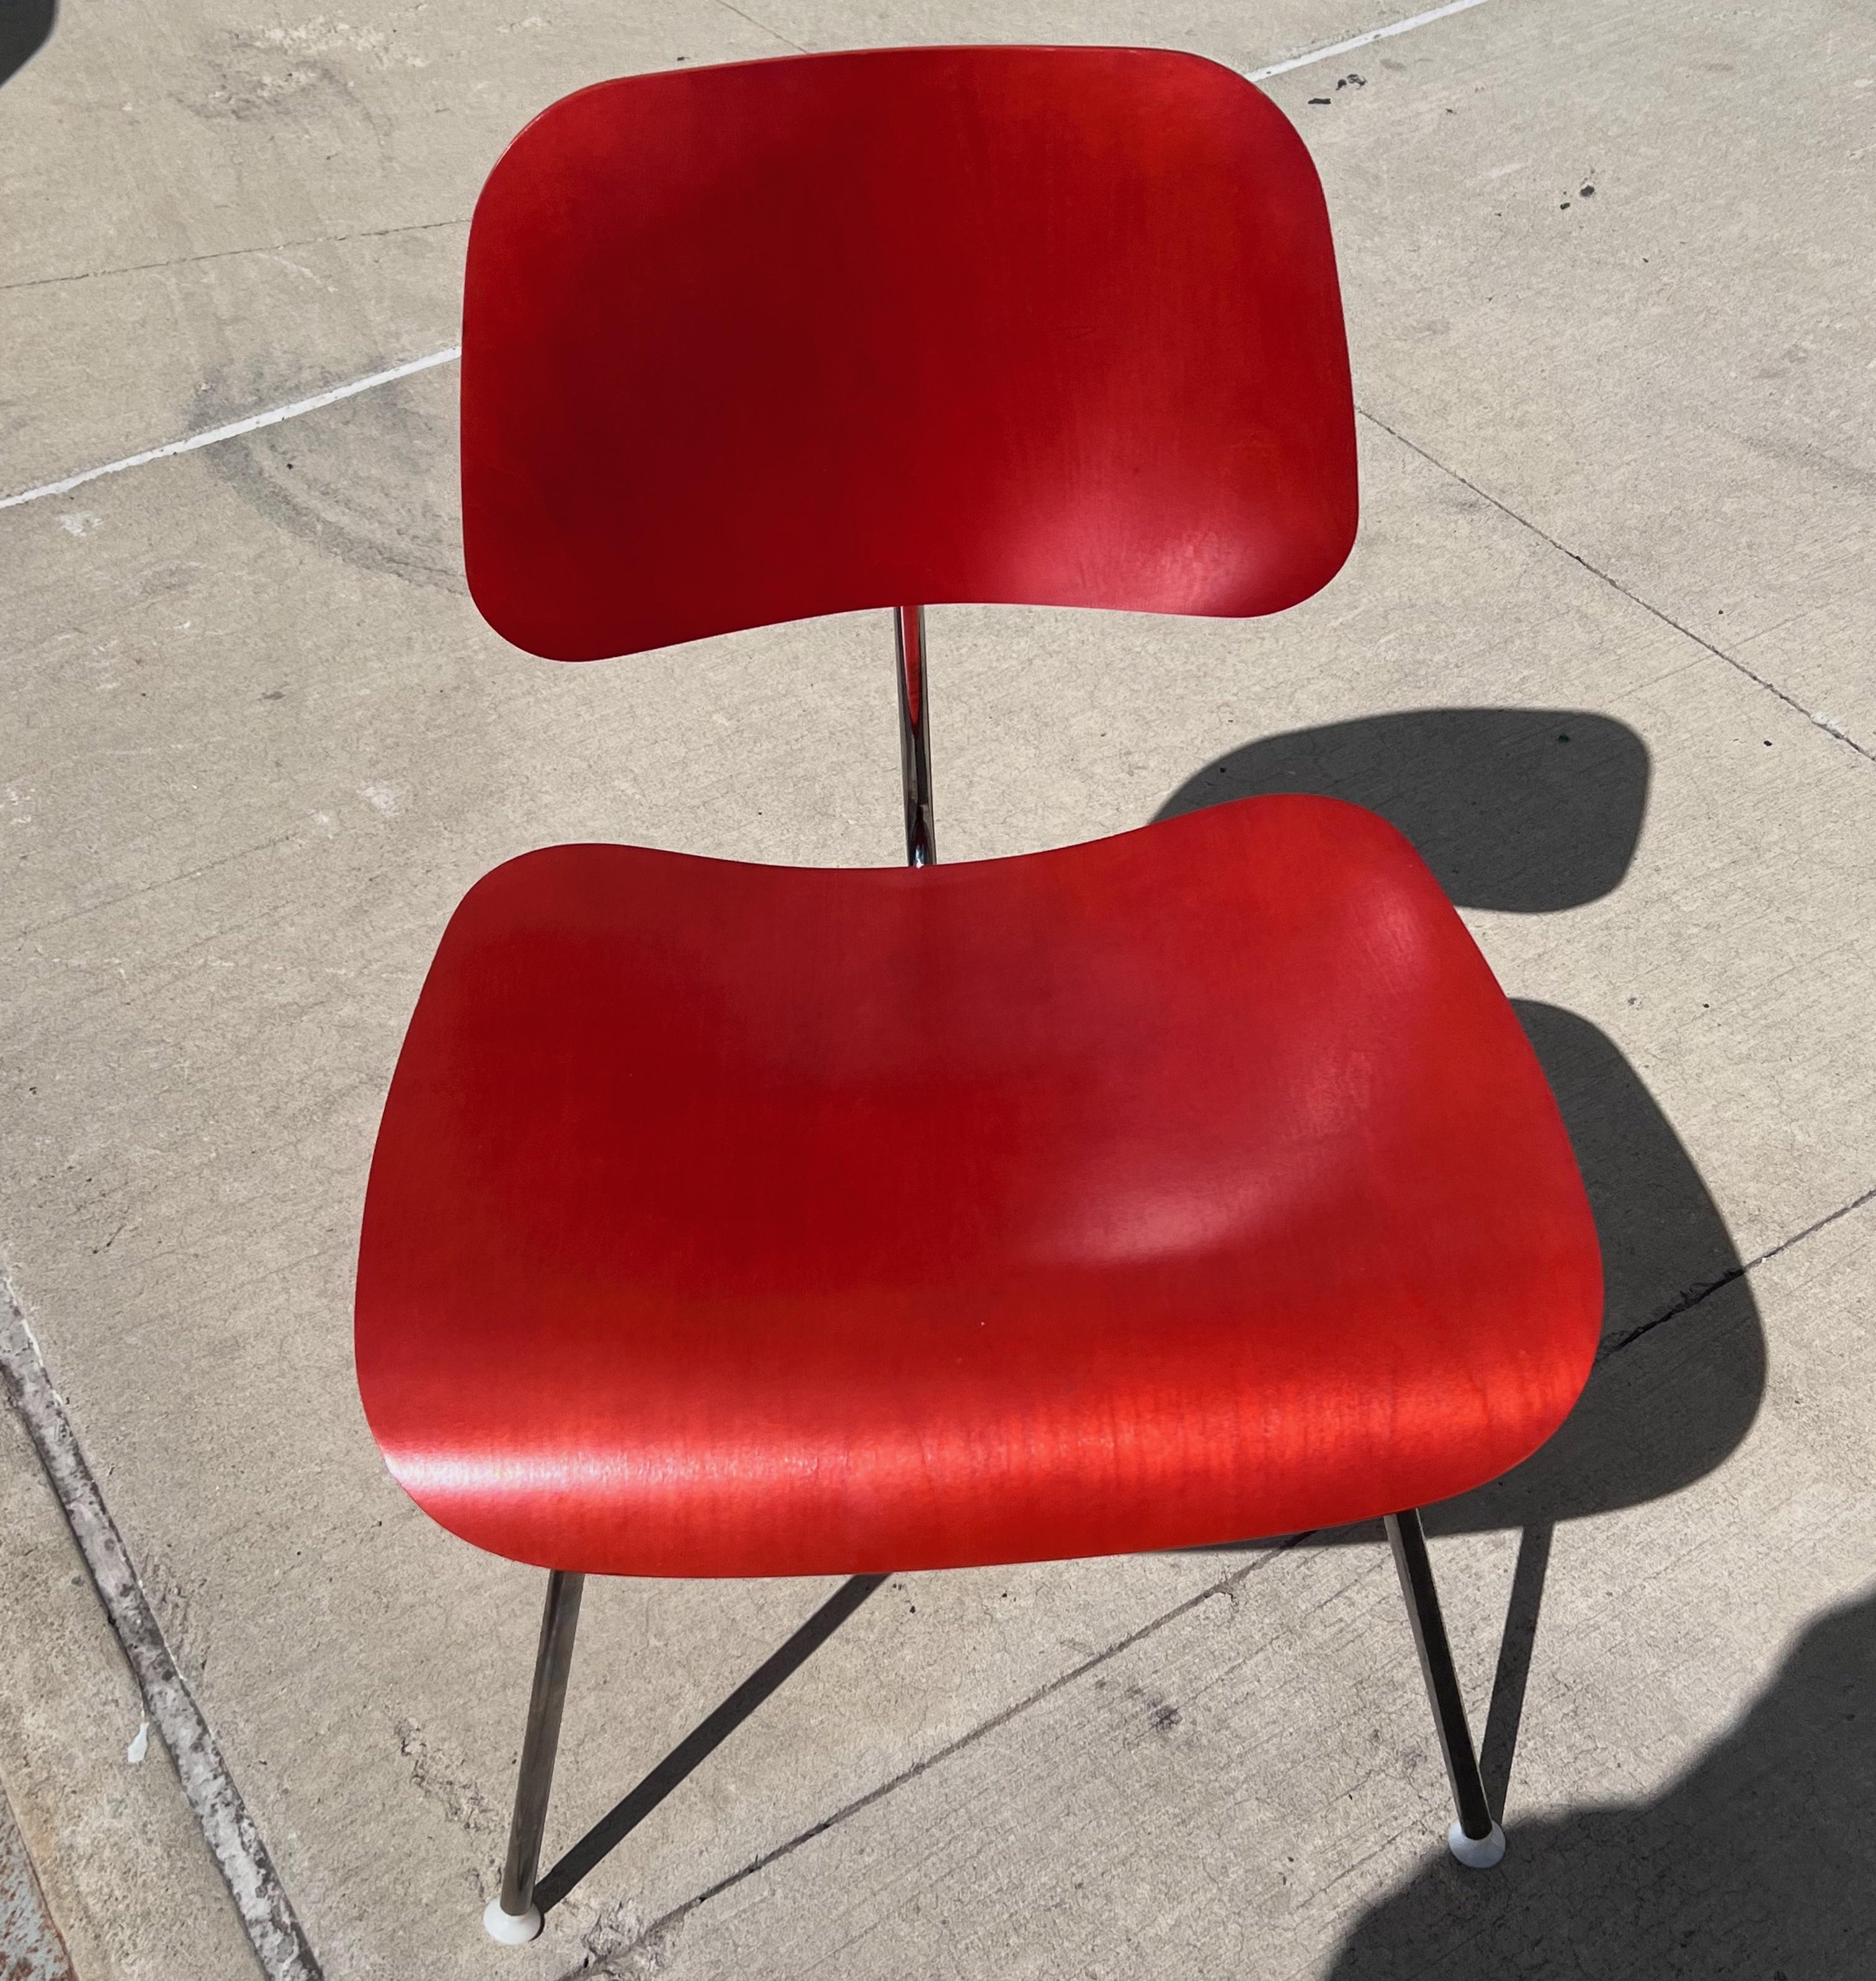 Charles and Ray Eames red beech DCM chair, Herman Miller, dining, side chair. Labeled. Designed in 1946. Produced in 2017.

Authentic Eames chair for everywhere - a lovely complement to any dining room table or office, this chair’s curved plywood